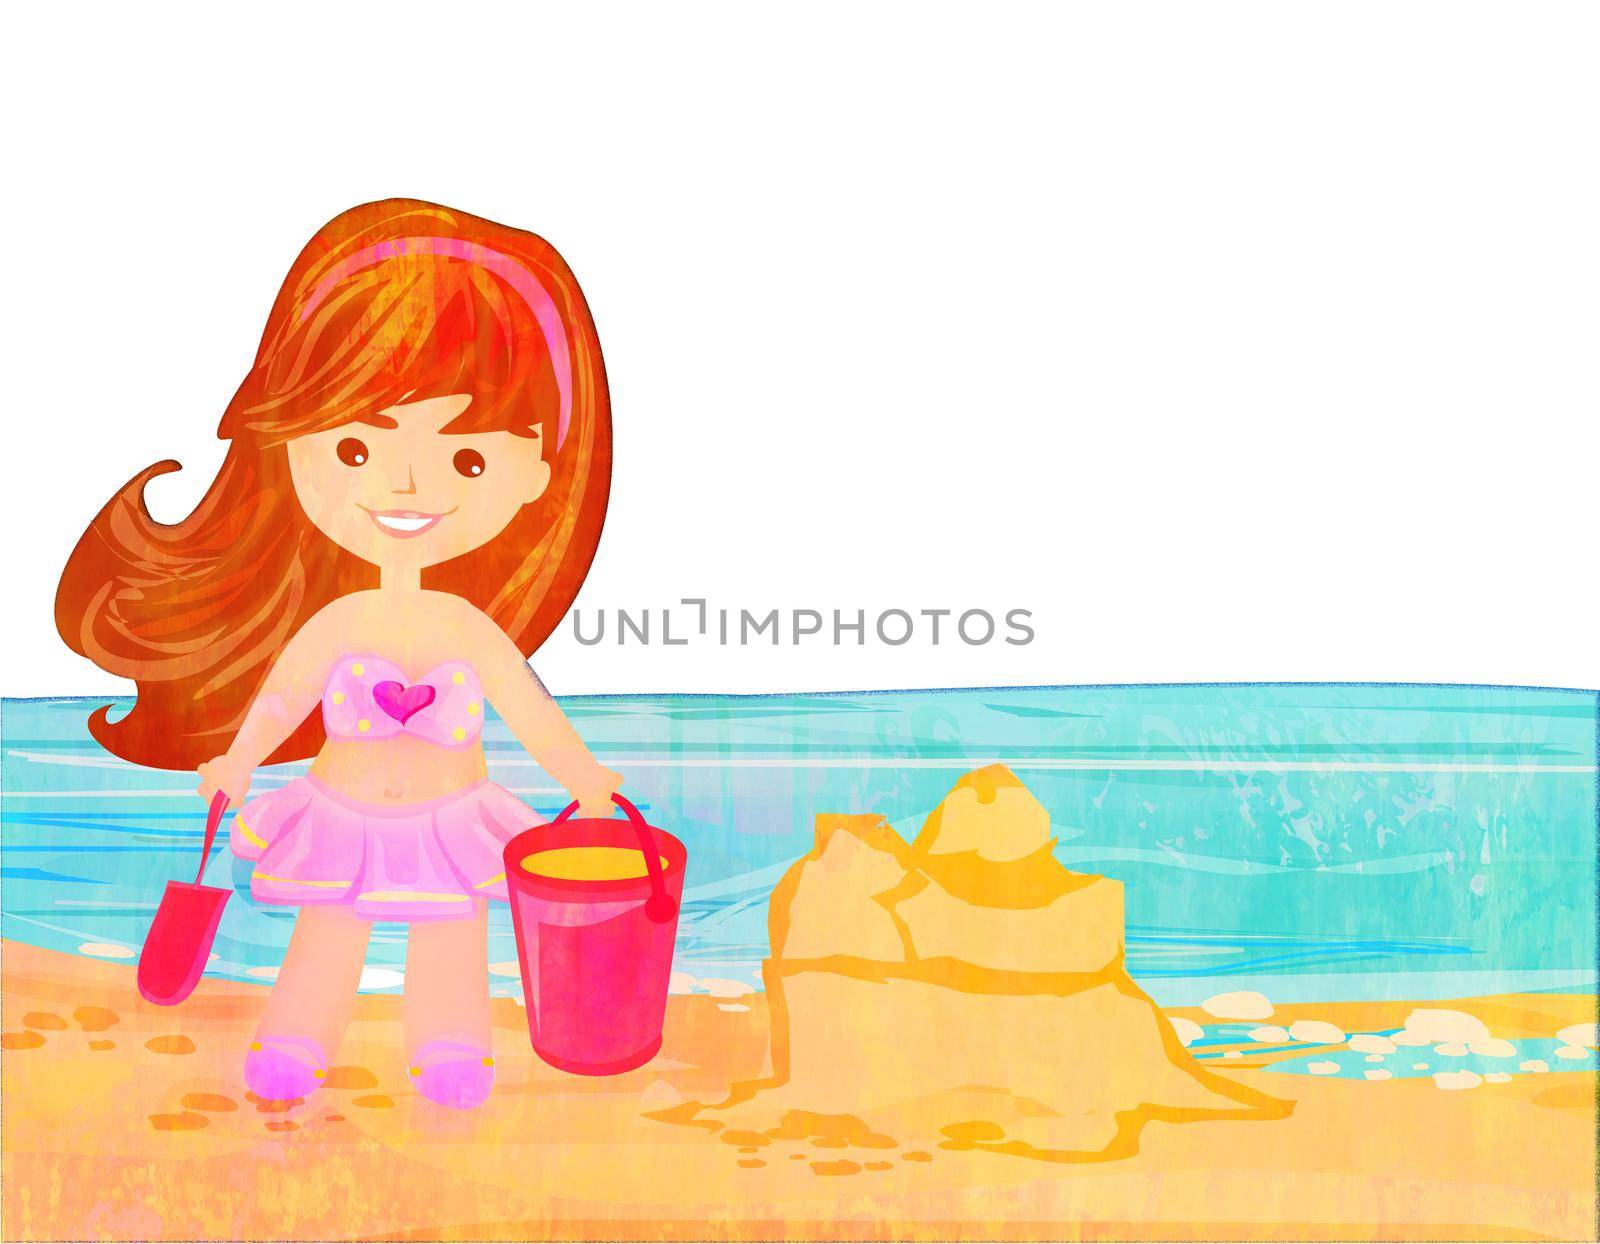 Little girl at tropical beach making sand castle by JackyBrown